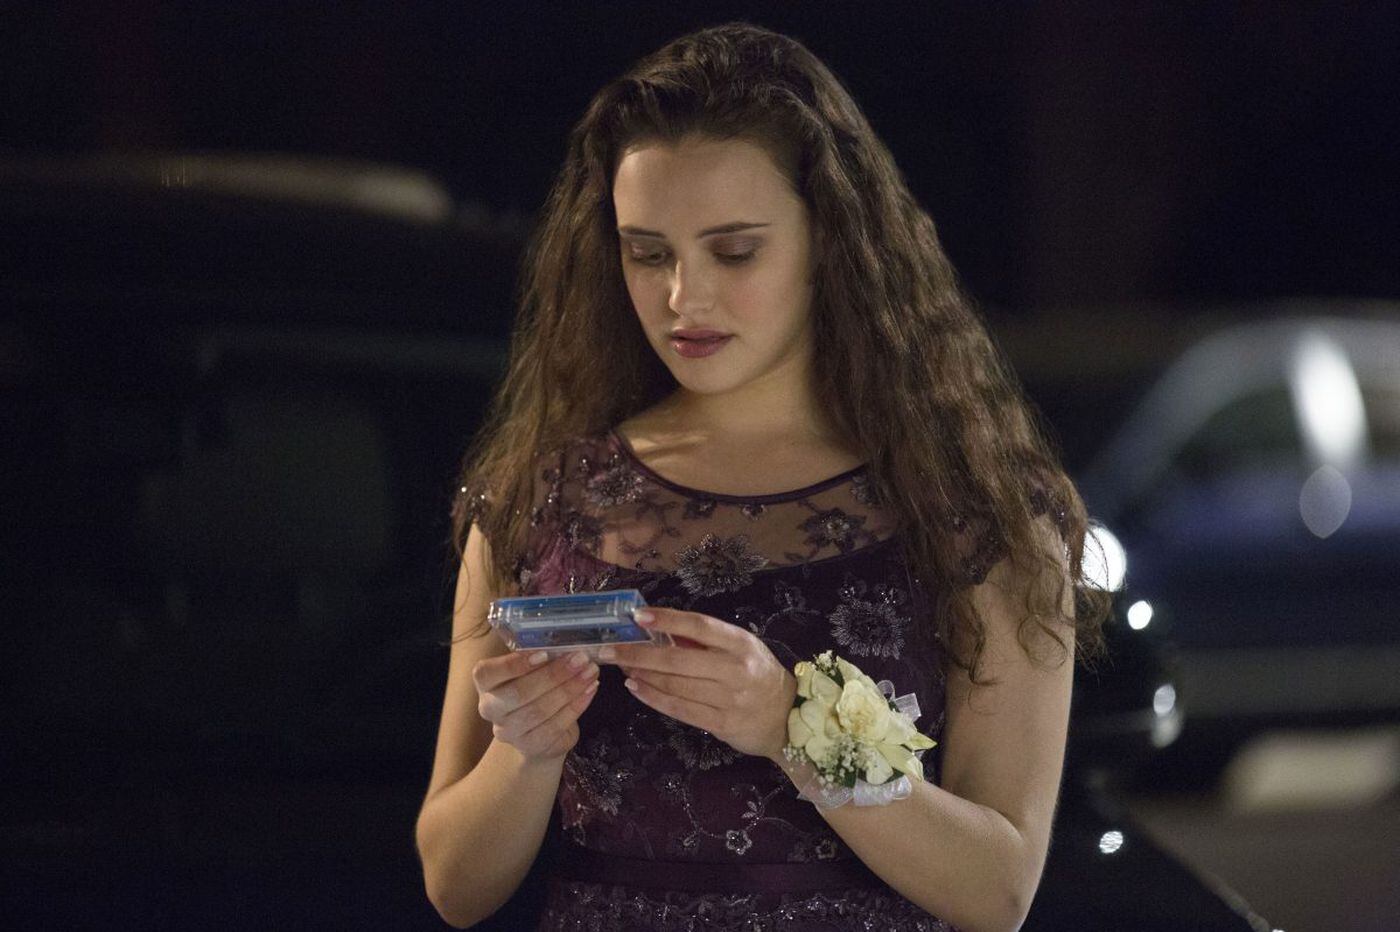 Netflix series ‘13 Reasons Why’ did not increase number of teen suicides, study finds